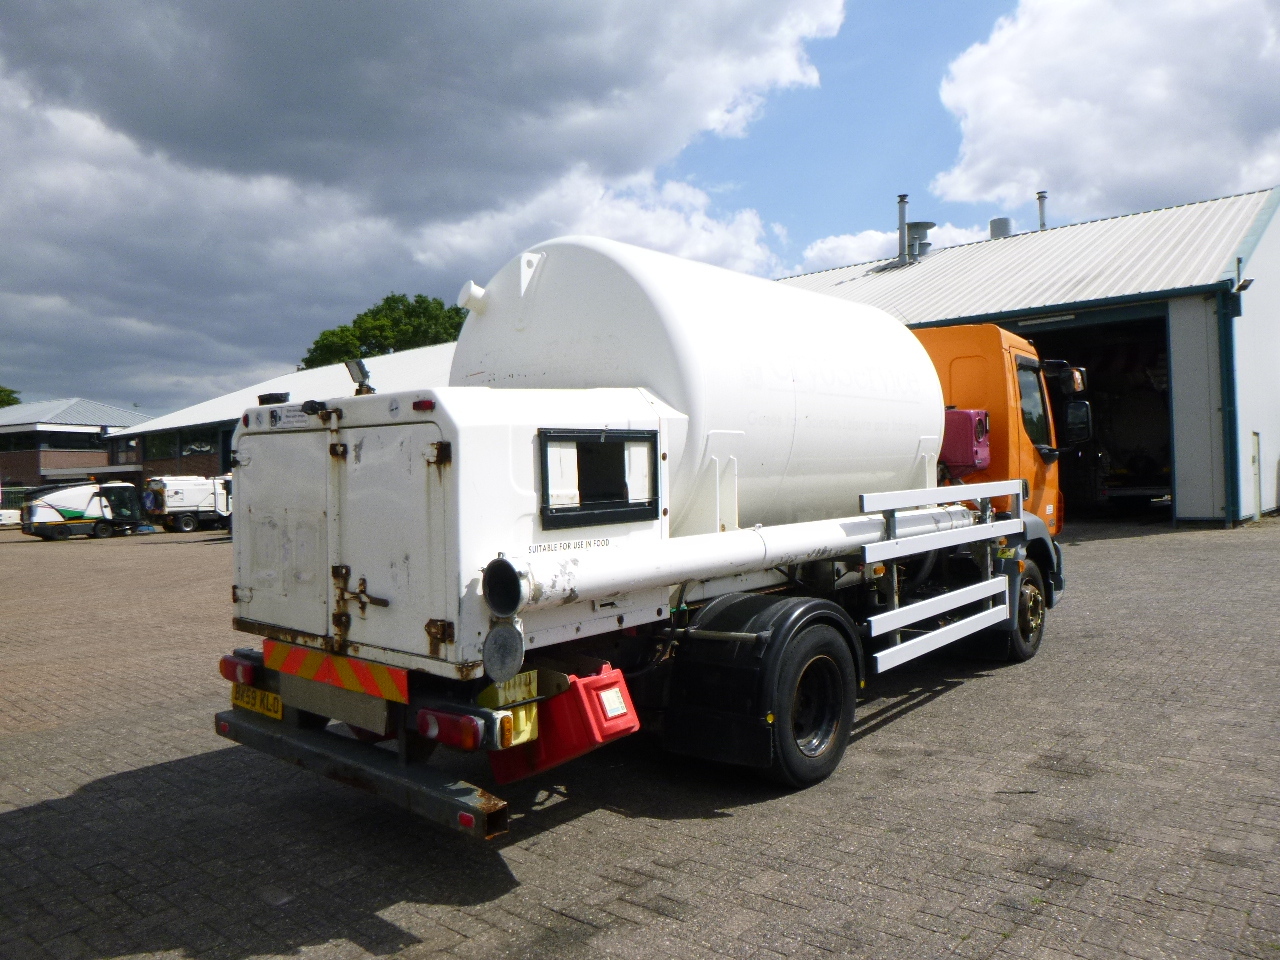 Tanker truck for transportation of gas D.A.F. LF 55.180 4x2 RHD ARGON gas truck 5.9 m3: picture 4